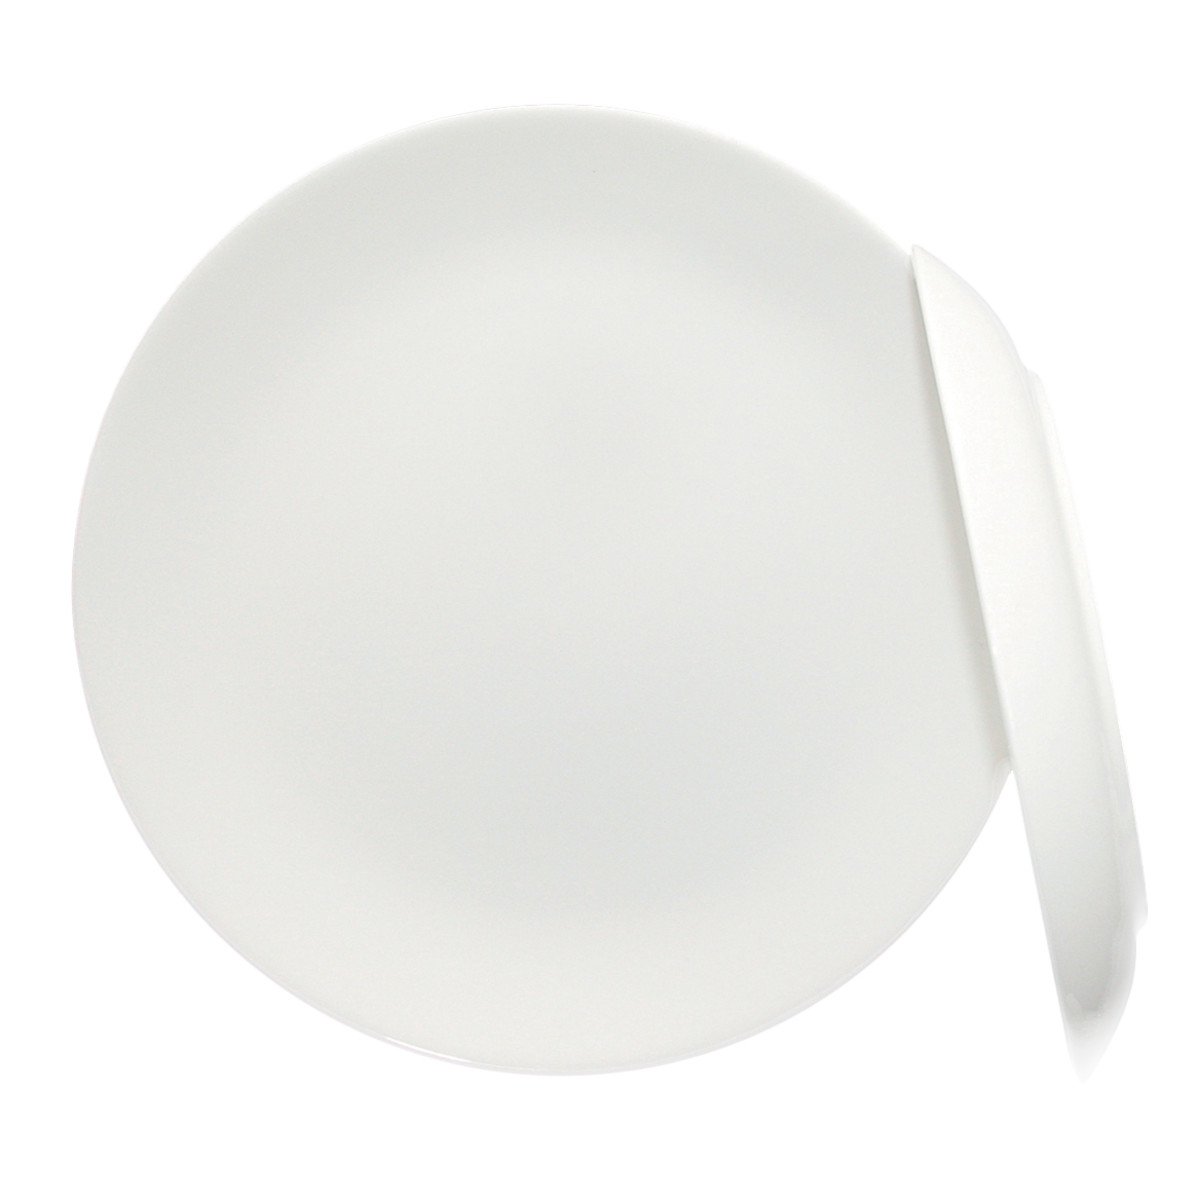 Purio Coupe Dinner Plate 10.75"